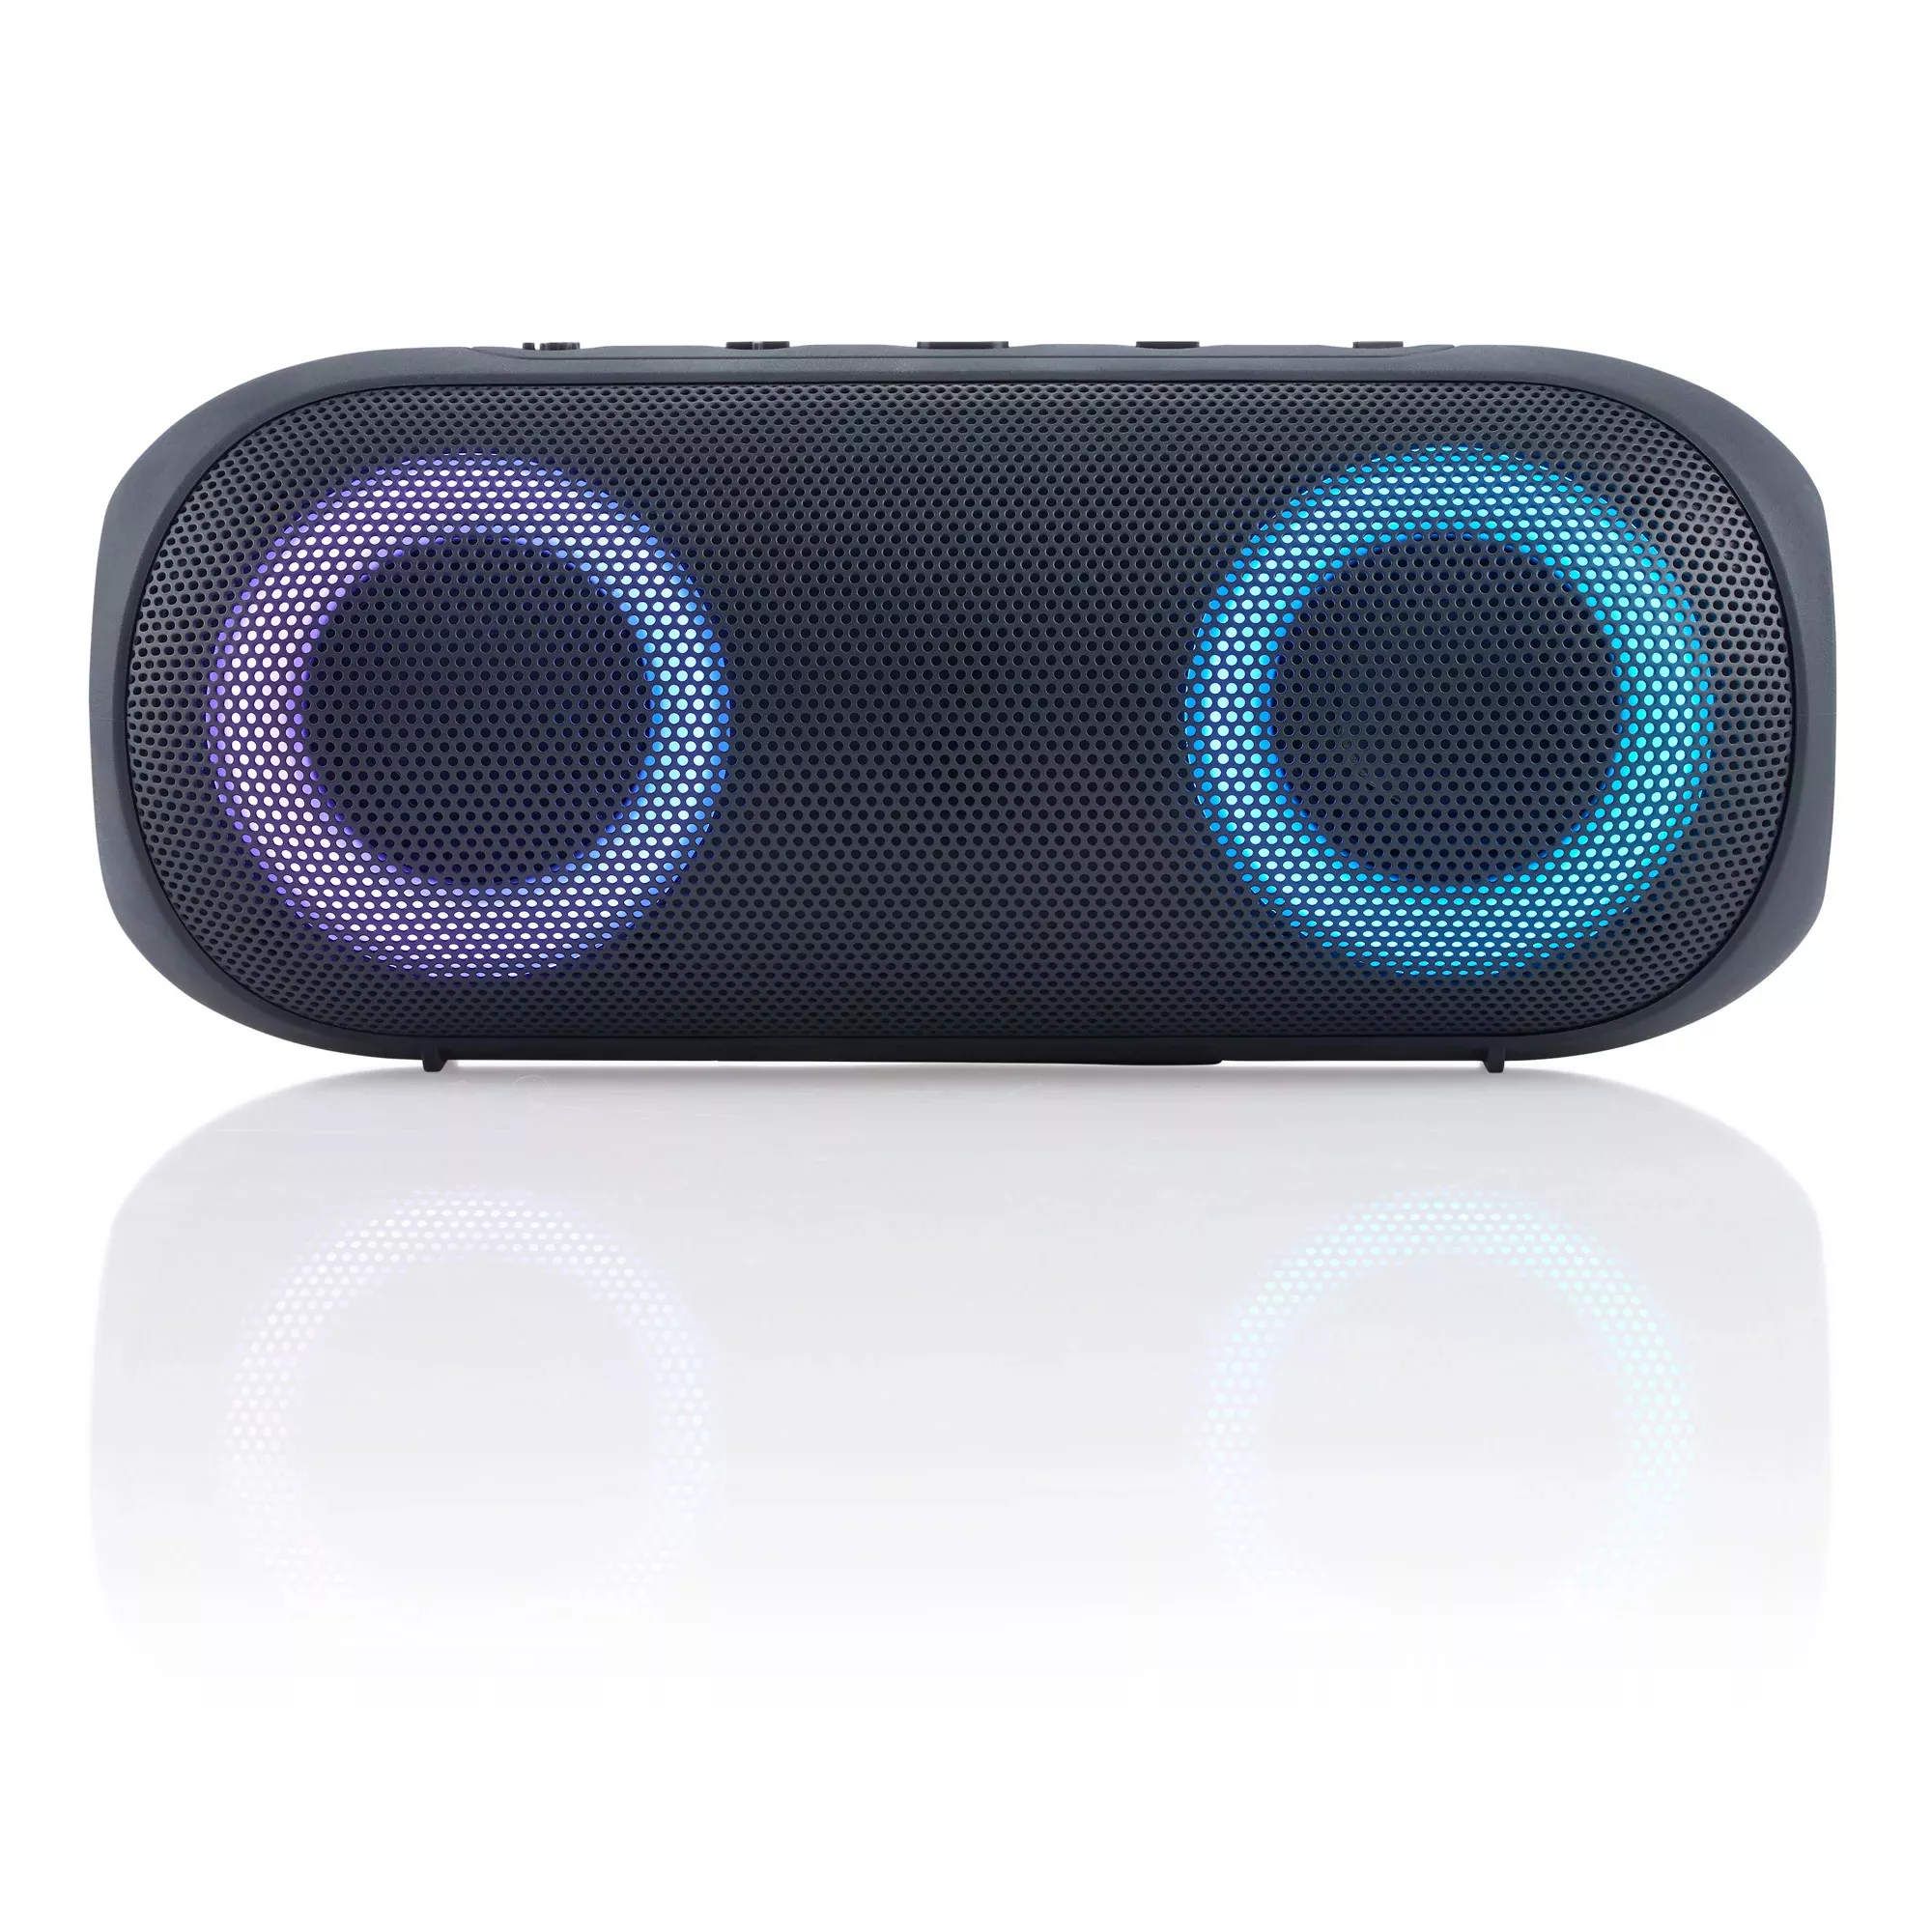 onn. Portable FM Boombox with LED Lighting